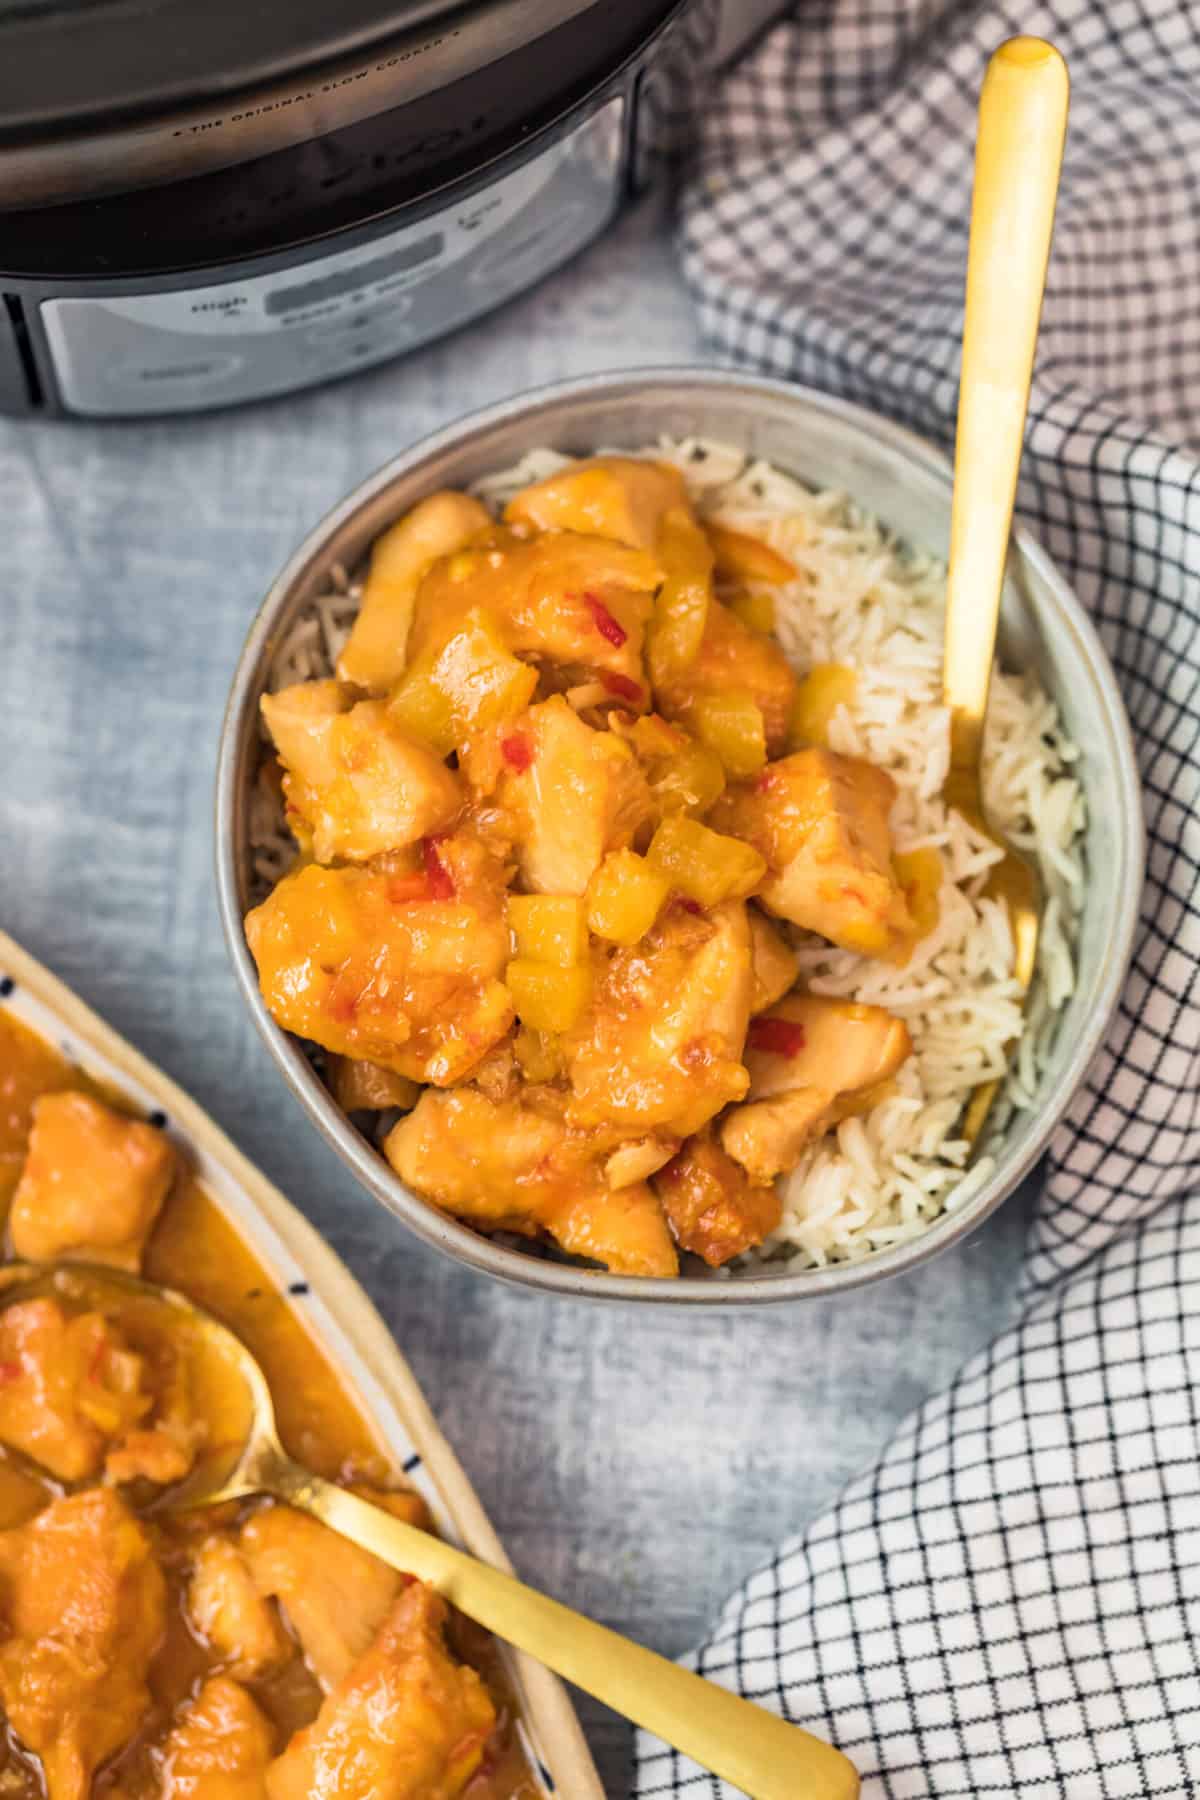 https://www.thecookierookie.com/wp-content/uploads/2020/04/crock-pot-sweet-and-sour-chicken-recipe-8-of-11-scaled.jpg